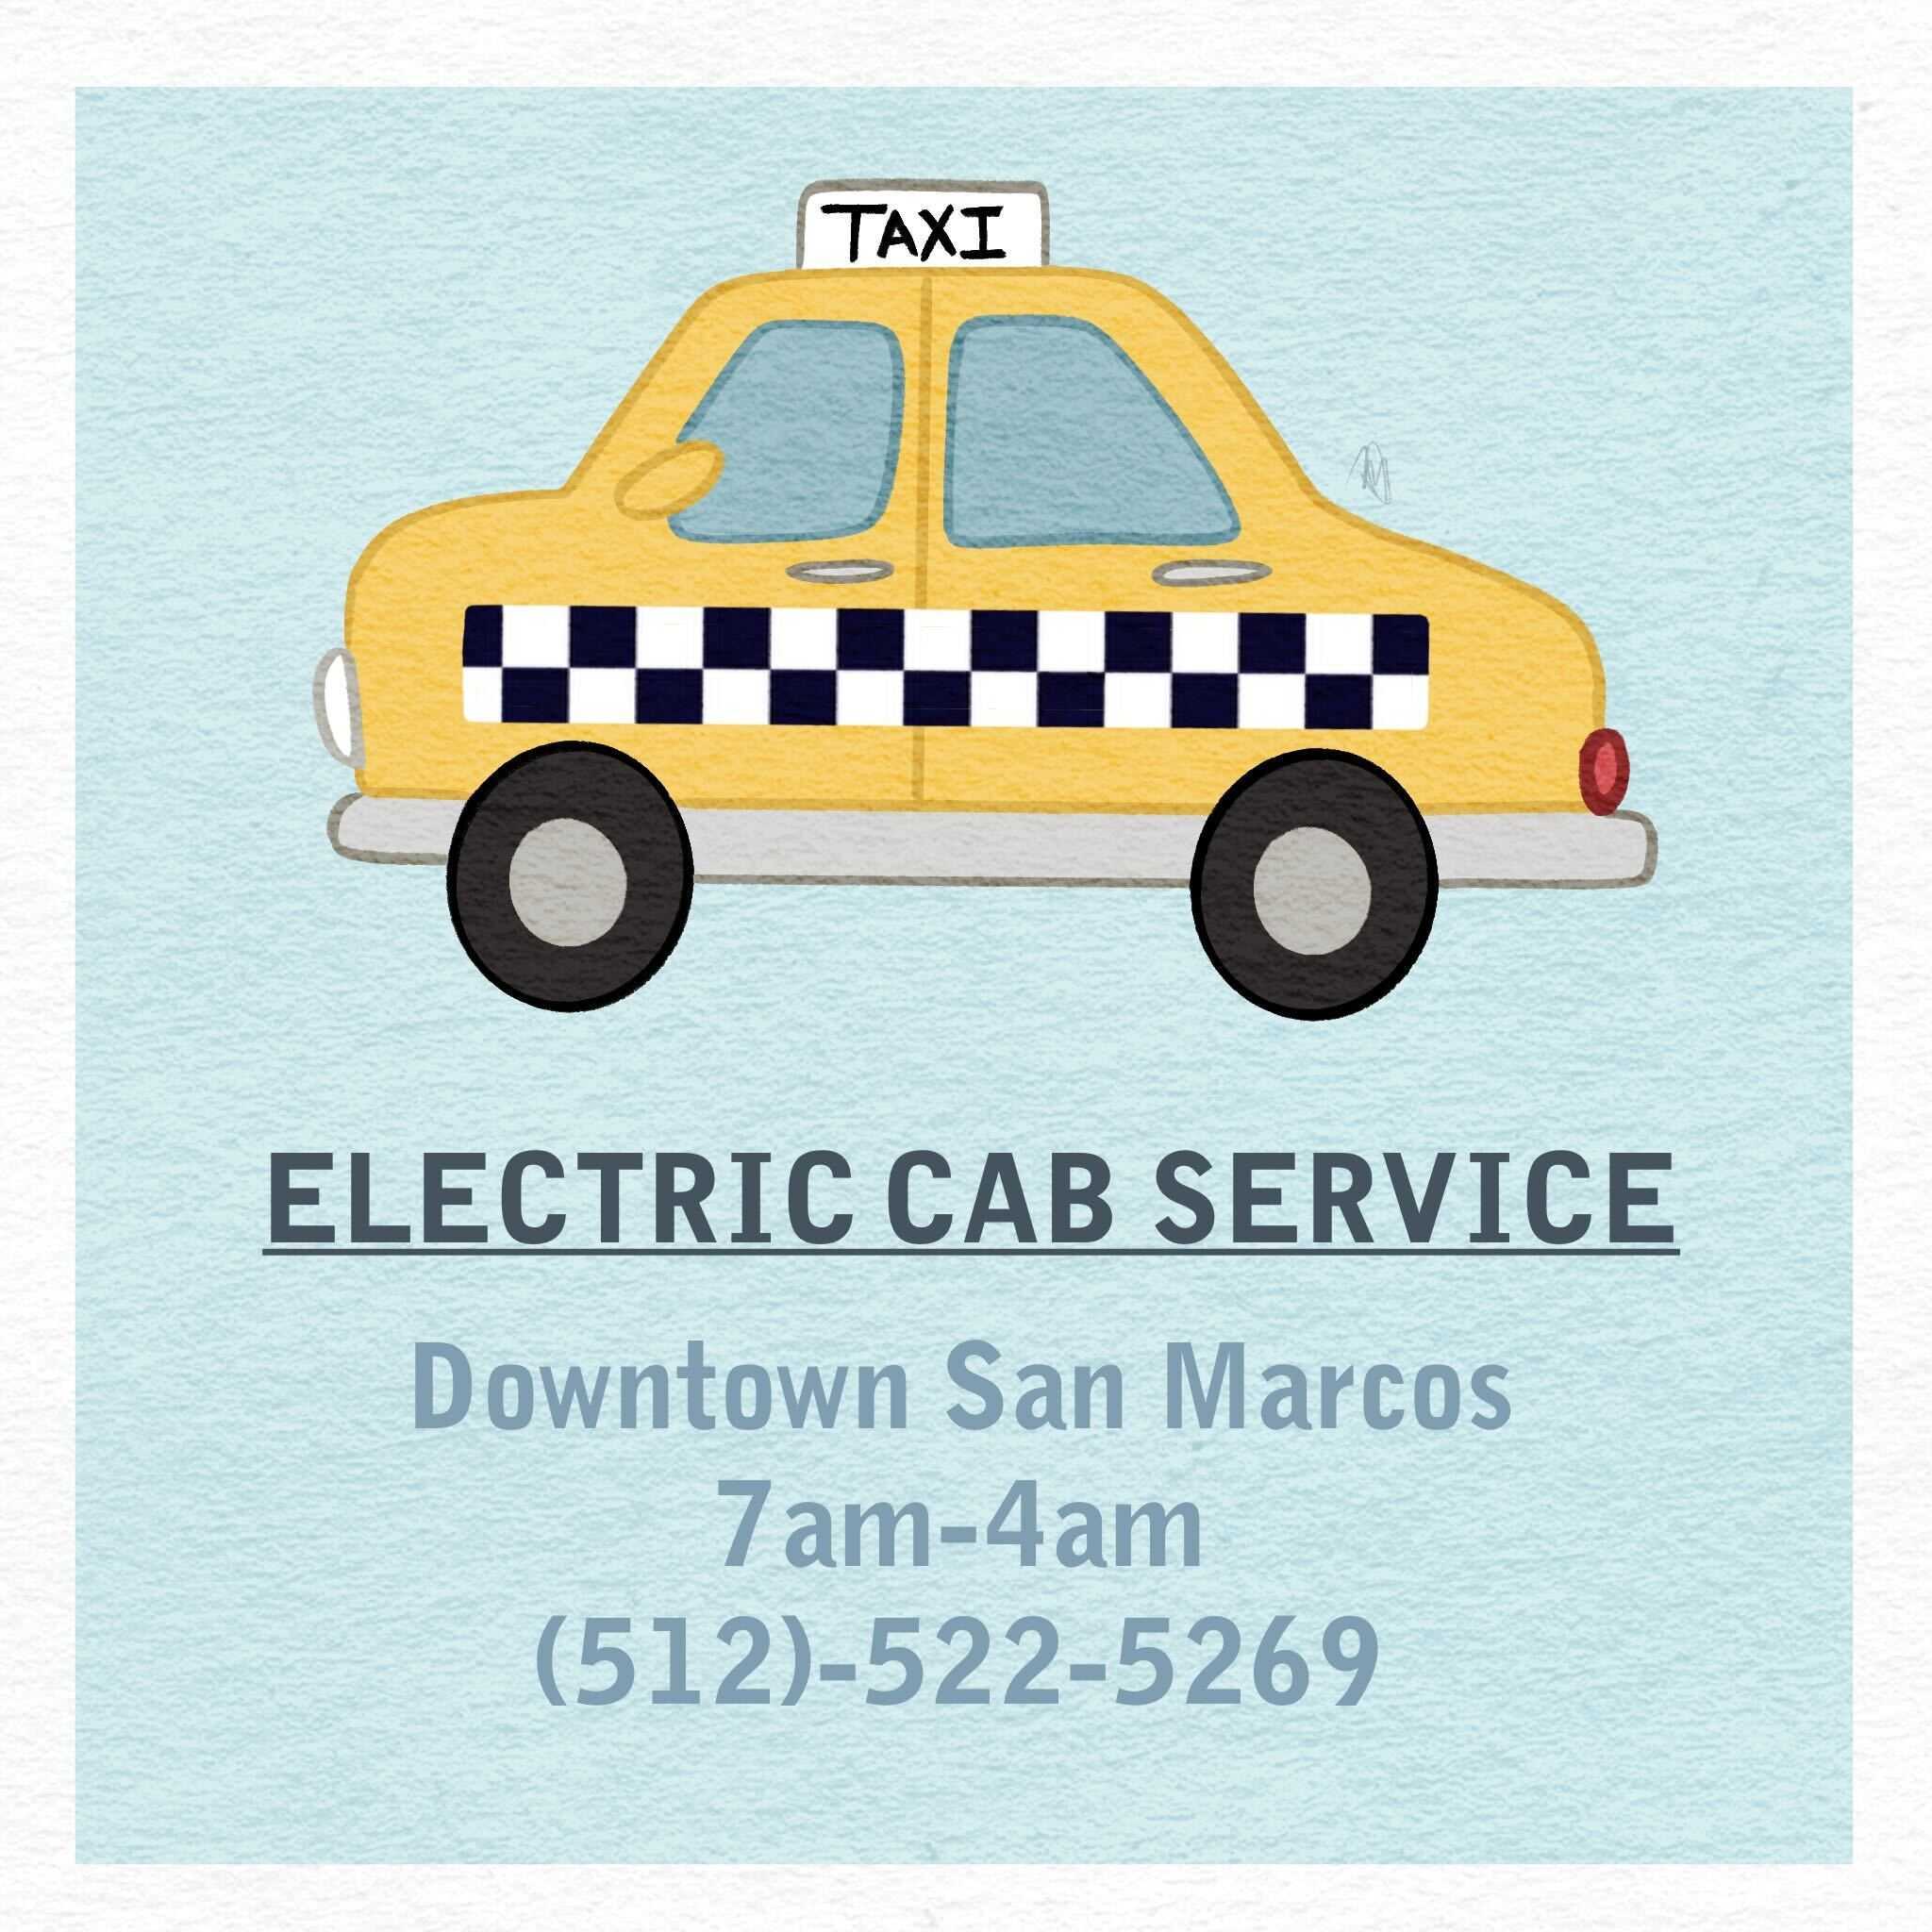 Catch+a+ride+on+the+Get+Around+Downtown+service